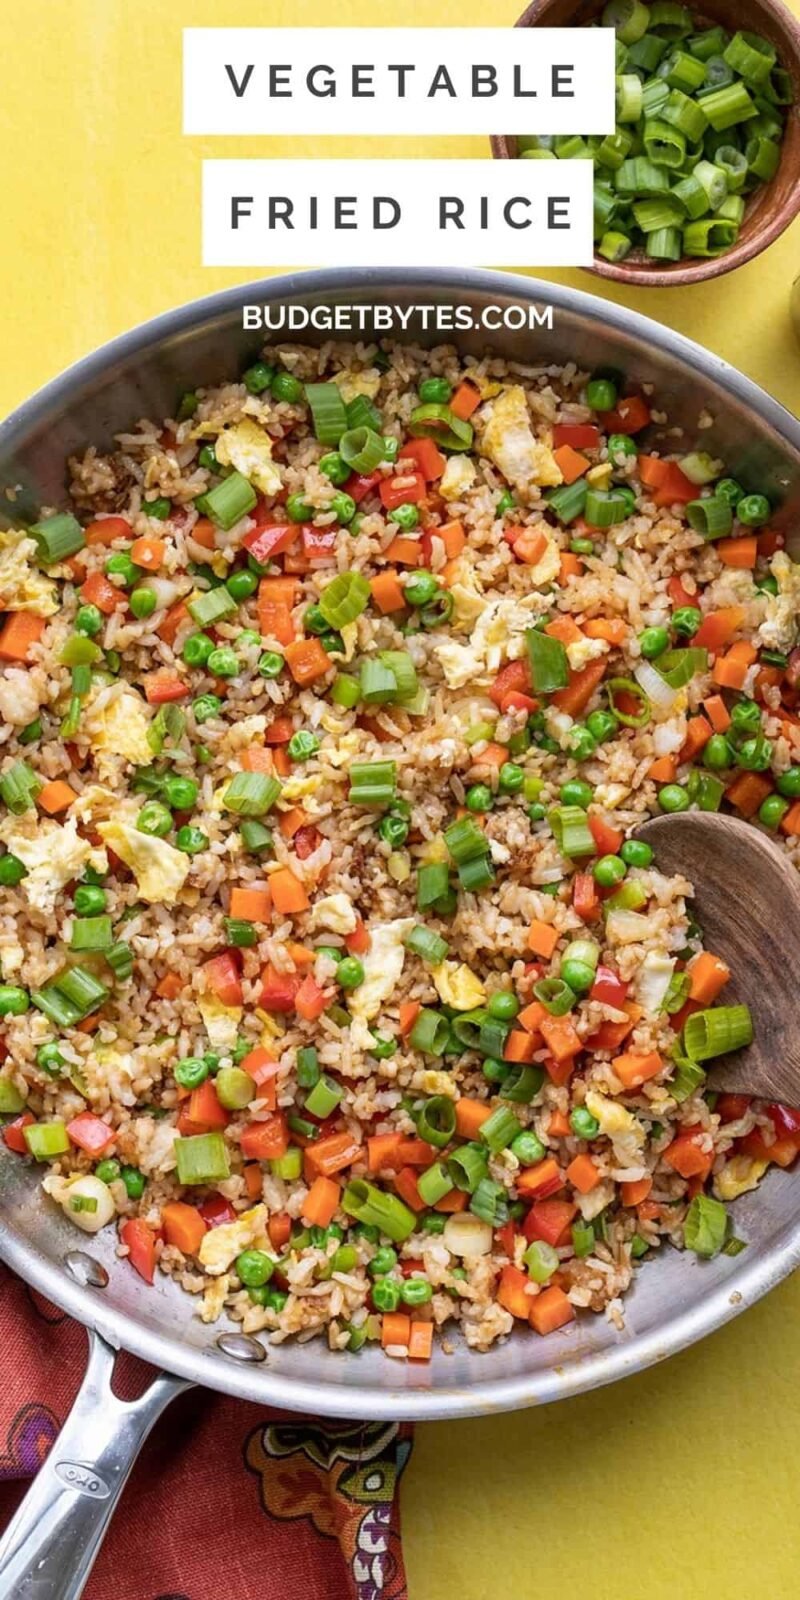 Overhead view of a skillet full of vegetable fried rice.